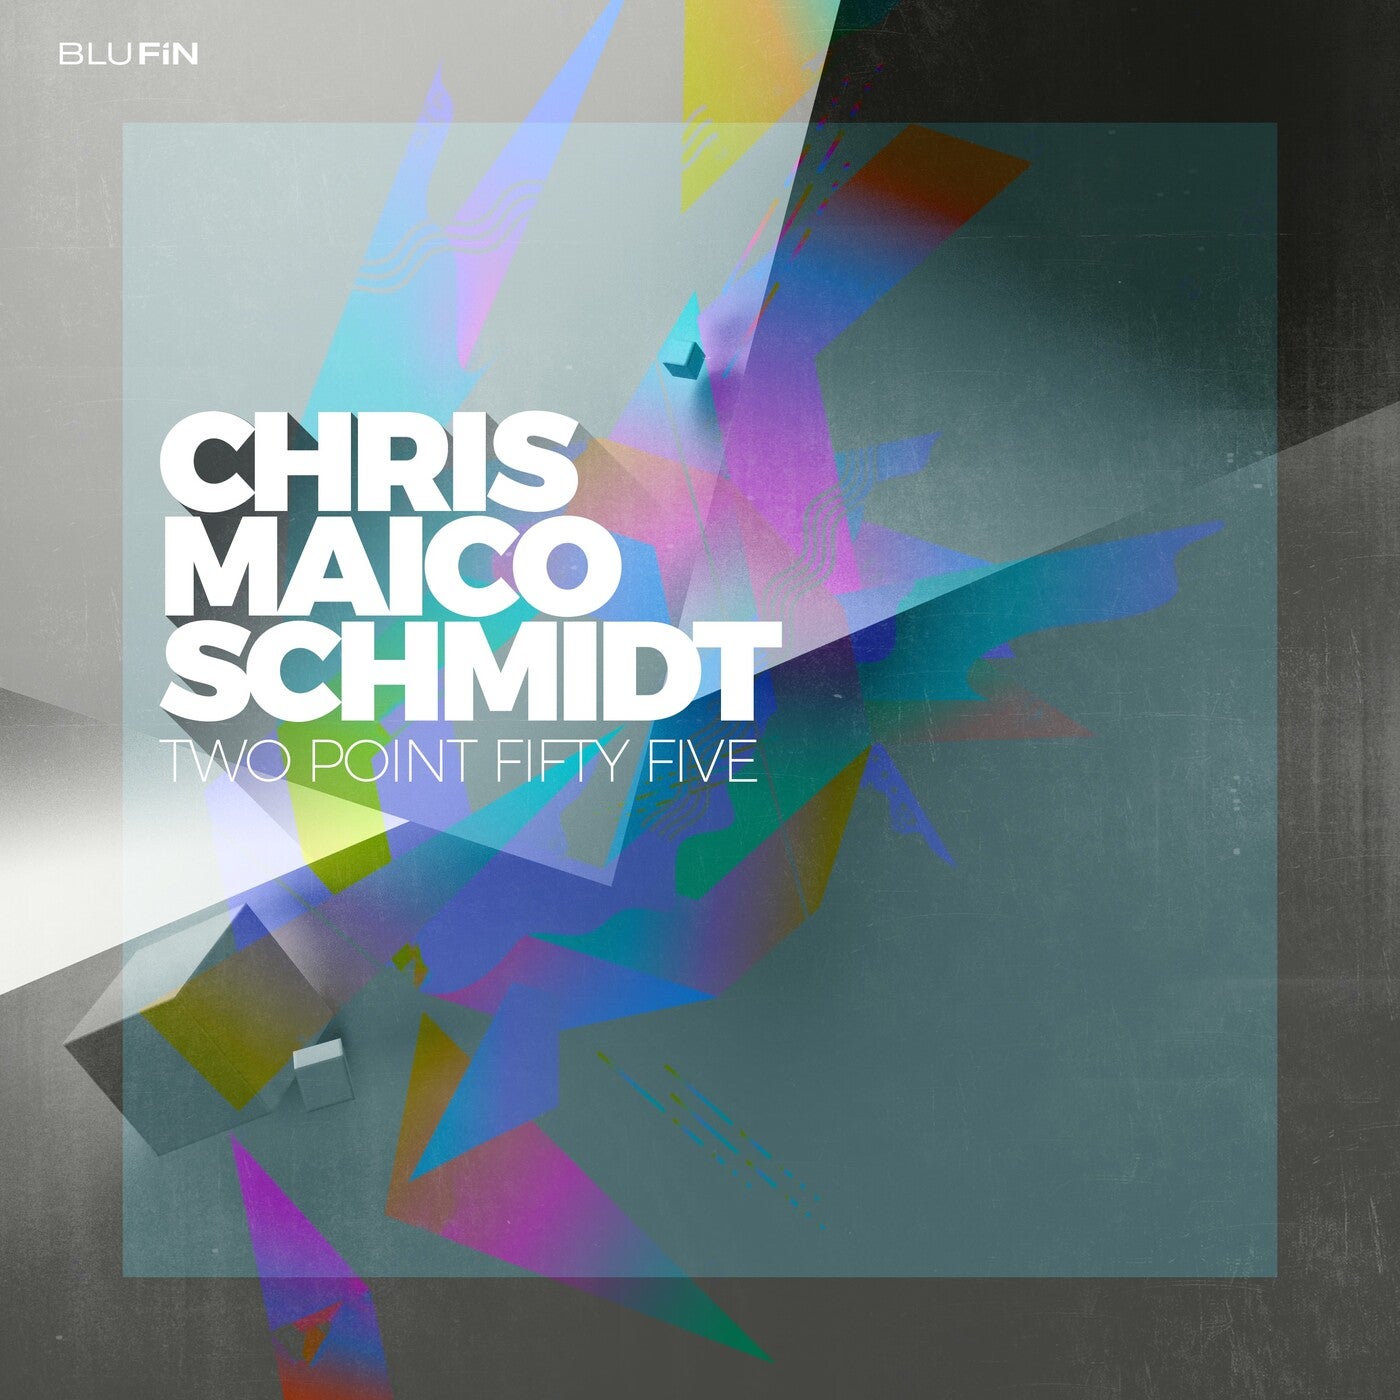 Chris Maico Schmidt - Two Point Fifty Five (Deluxe) [BluFin]